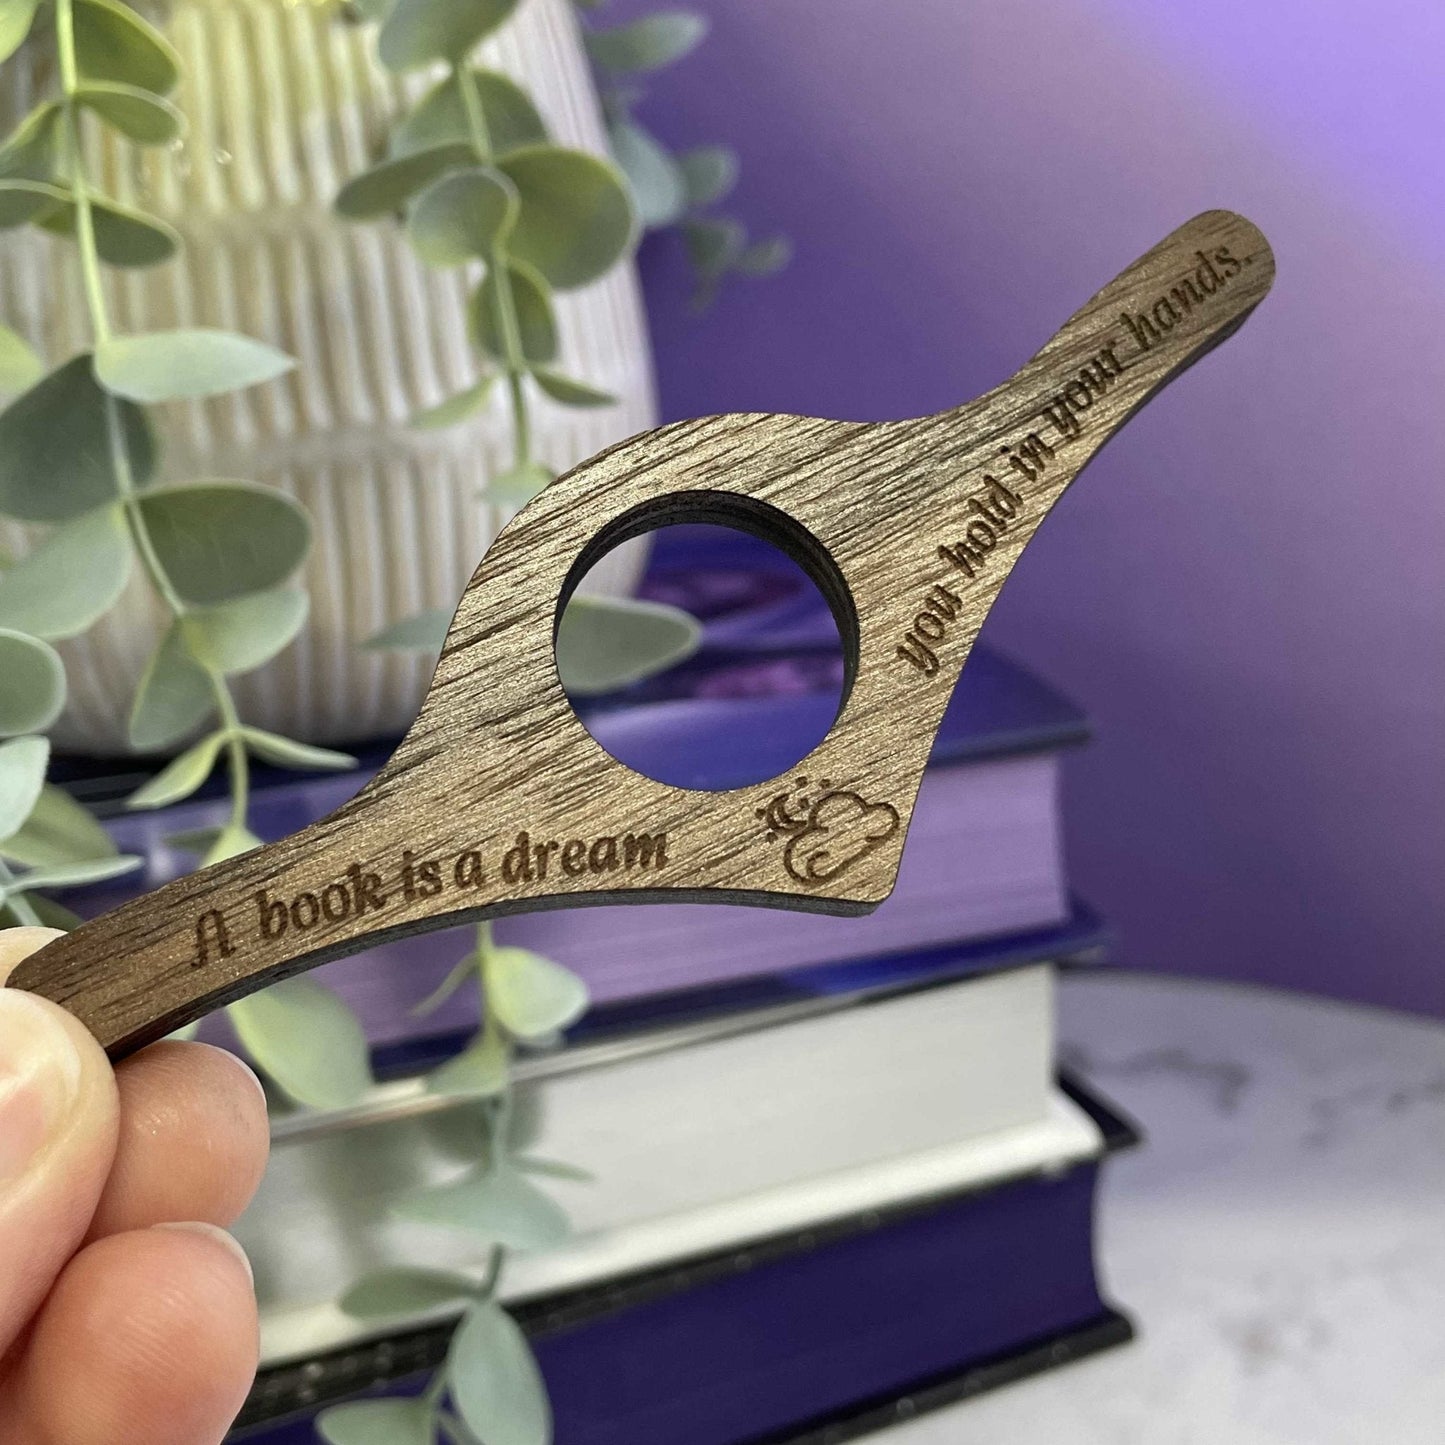 A Book Is A Dream Thumb Book Holder - Lost Minds Clothing